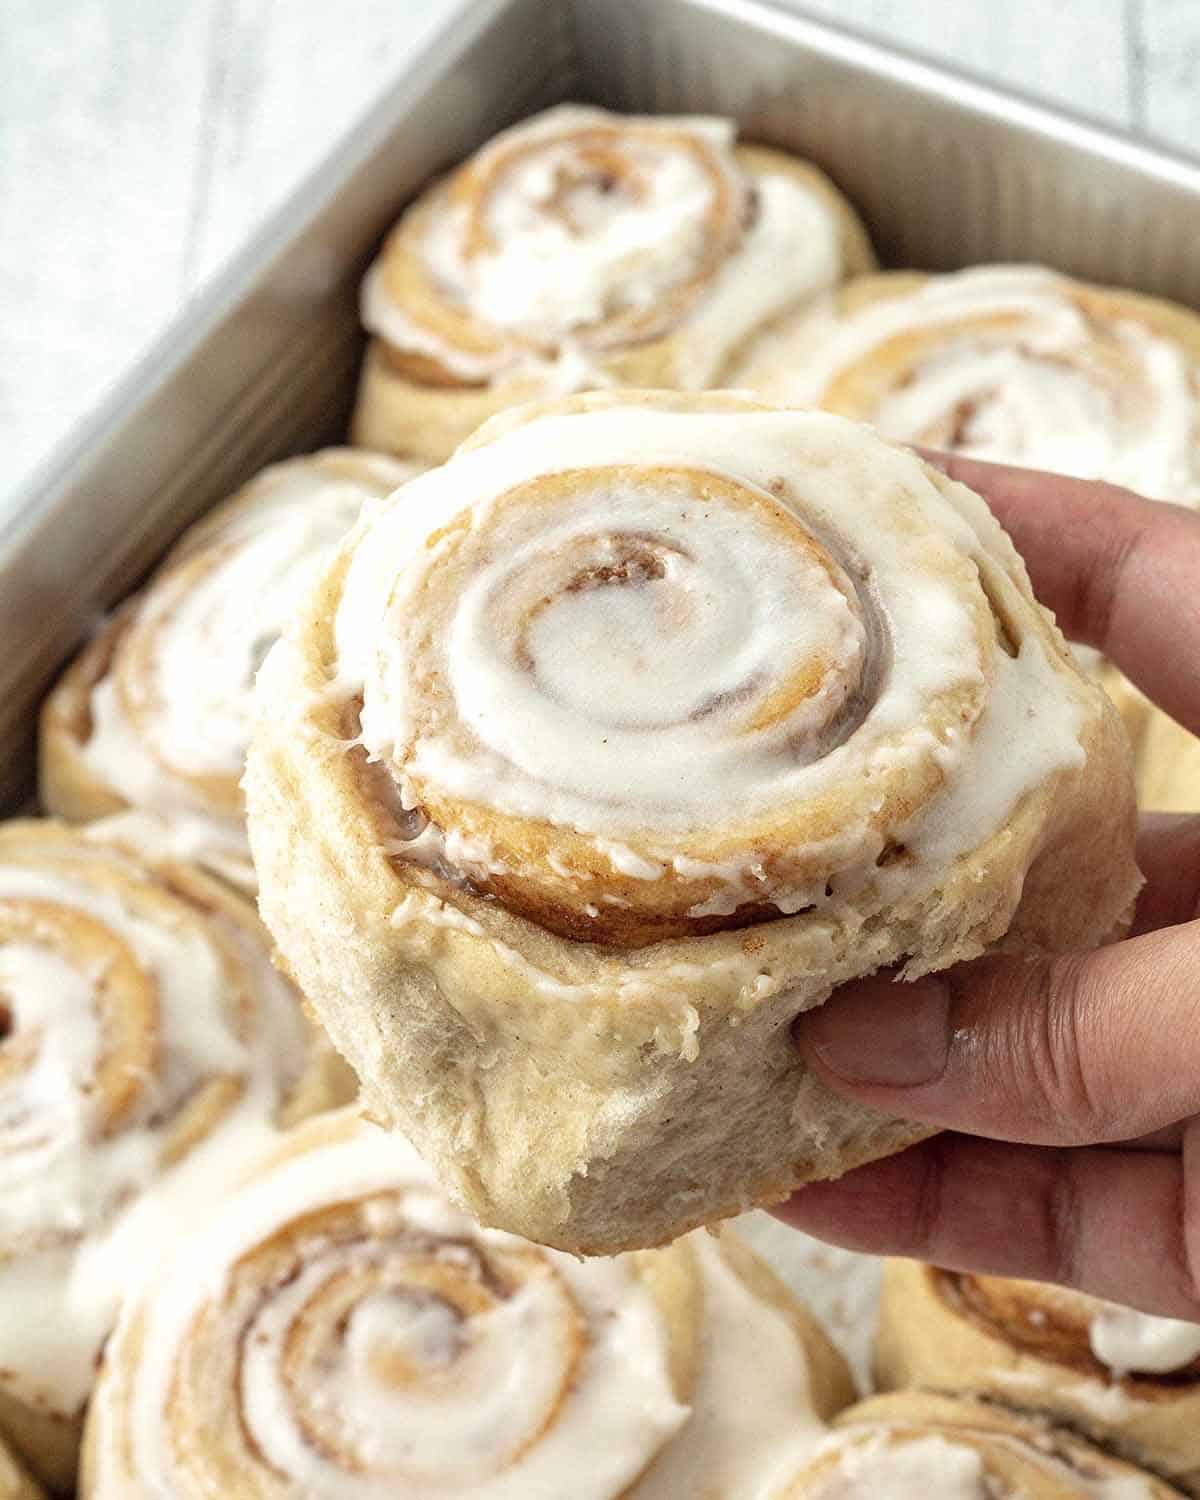 A hand taking a freshly baked cinnamon roll out of the baking pan.